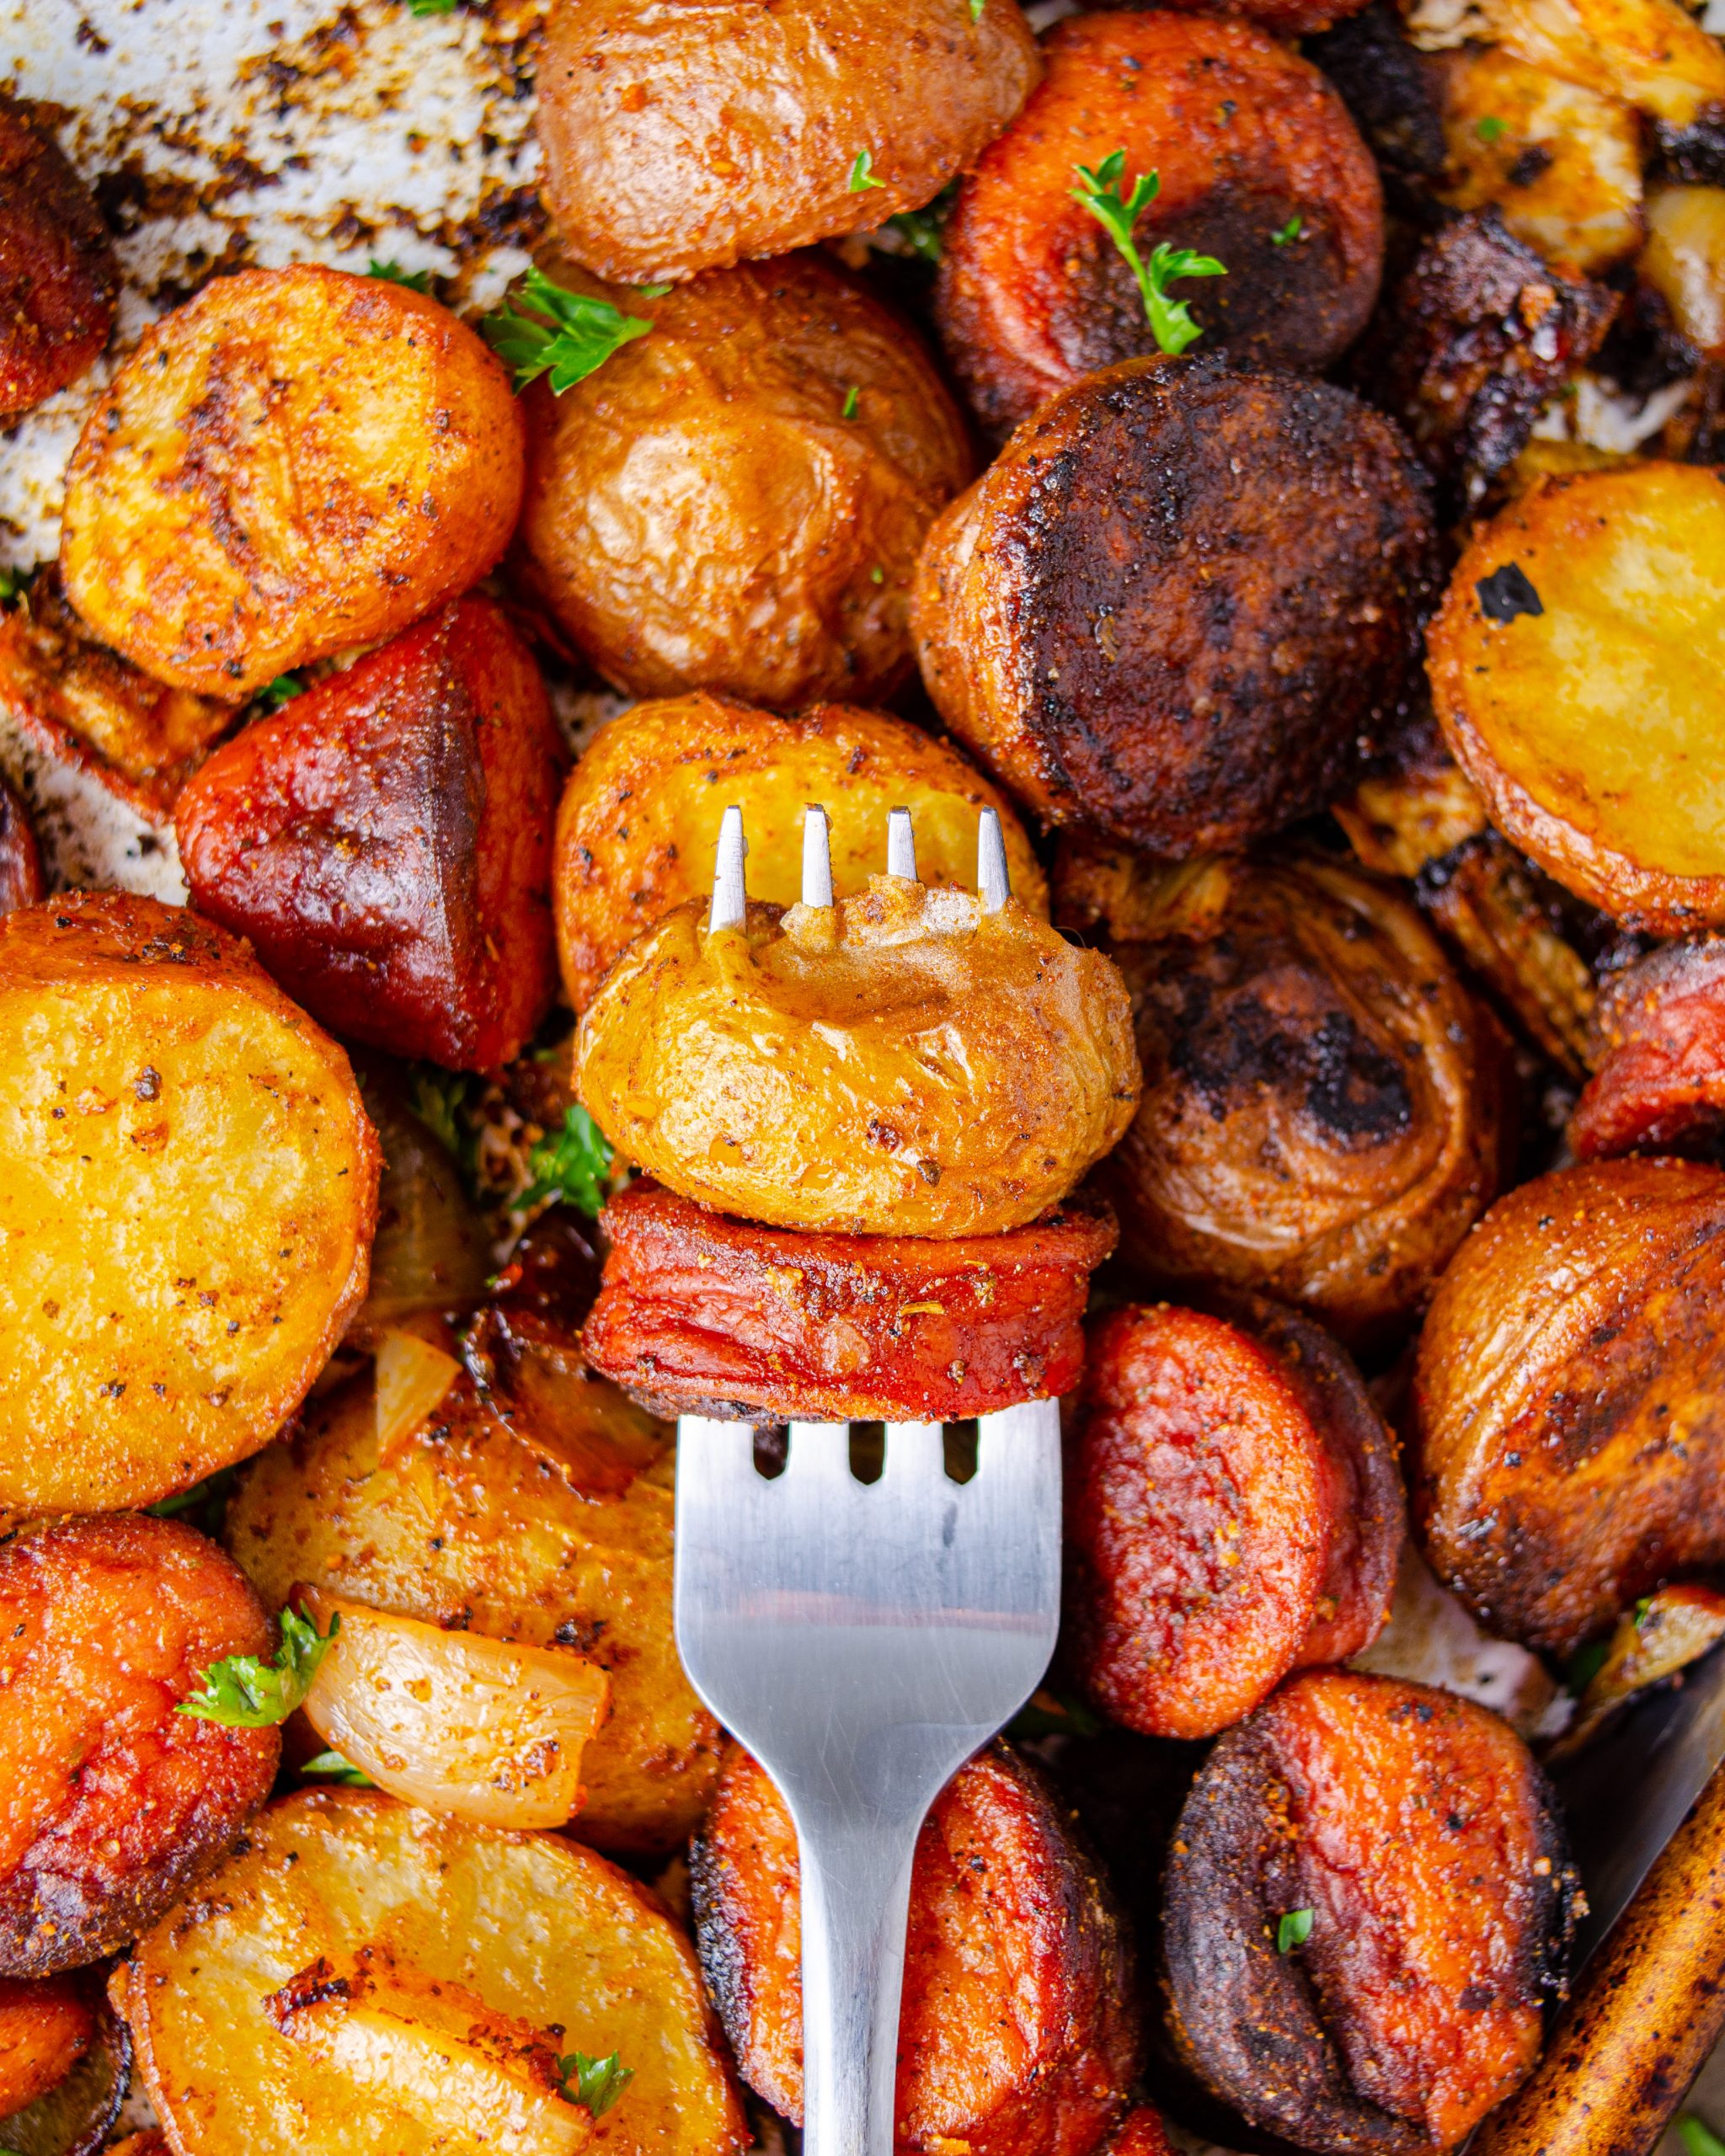 baked sausage and potatoes, Oven Roasted Sausage and Potatoes, Sausage and Potato Bake